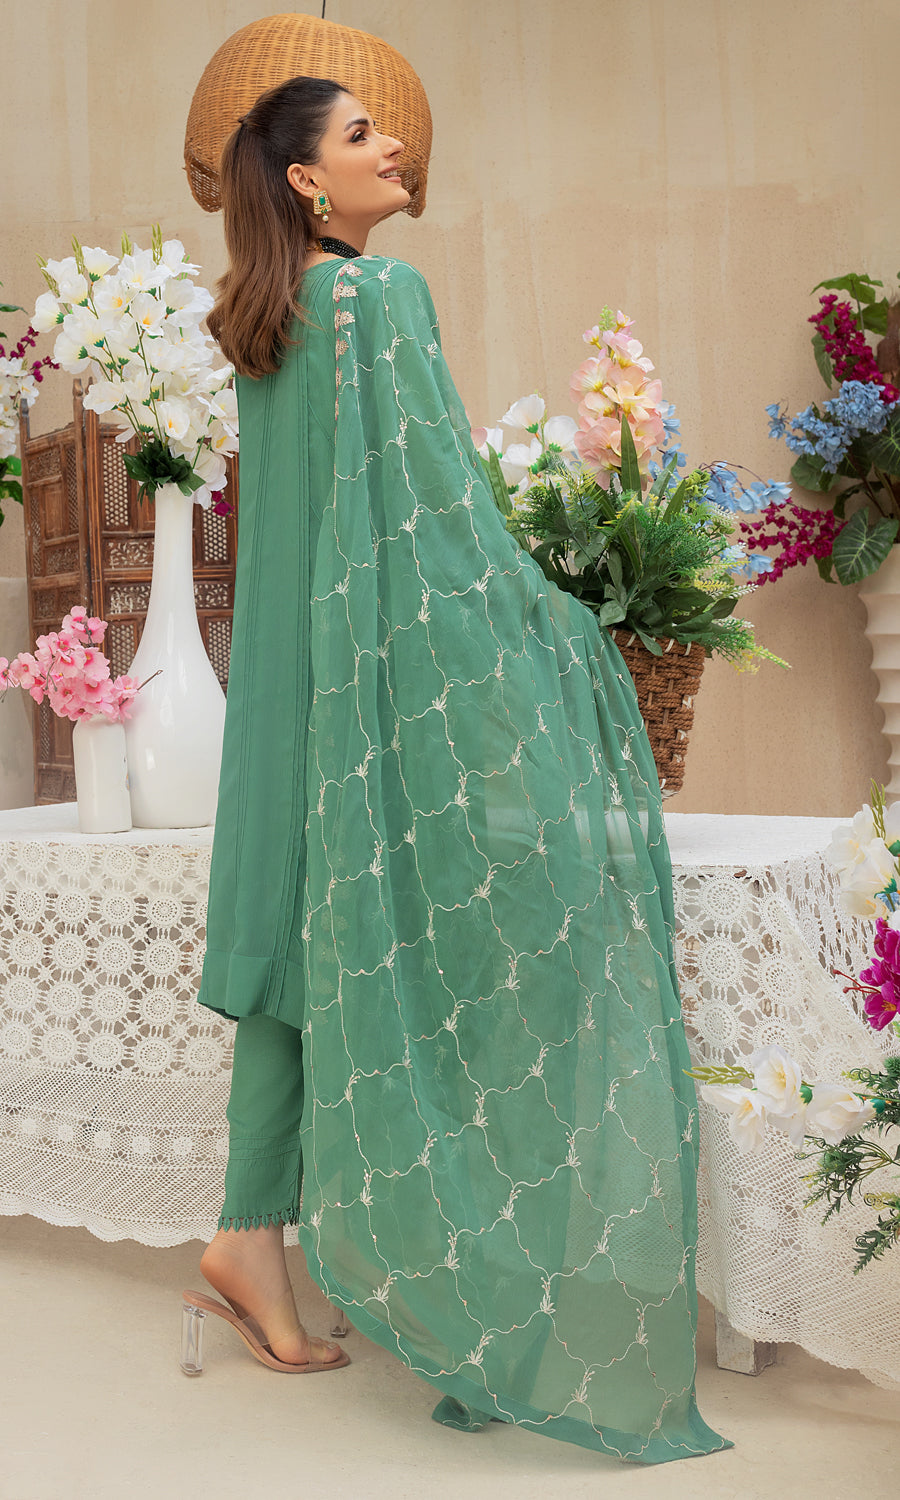 Shamooz-Mushq Volume 3. Step into elegance with this masterpiece with vibrant color and embrodiery work on the front and side panel that enhances a pop of color and elevate the design.The delicately hand-embellished adds a touch of glamour.This ensemble is a perfect balance of elegance.